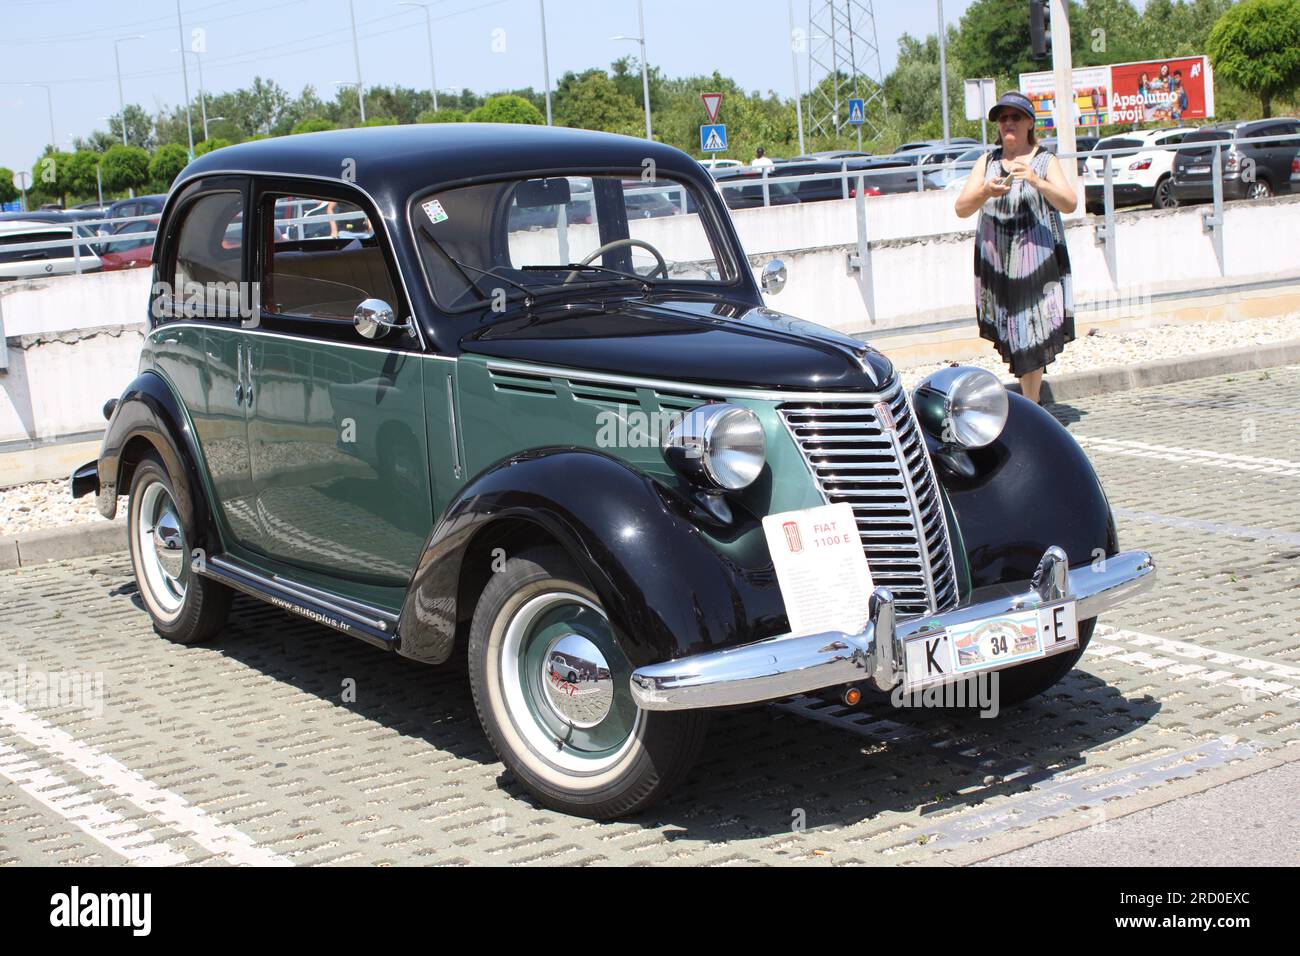 The Fiat 1100 is a small family car that was produced by the Italian car manufacturer Fiat from 1937 to 1953. Exhibition of vintage cars, Osijek, 2023 Stock Photo